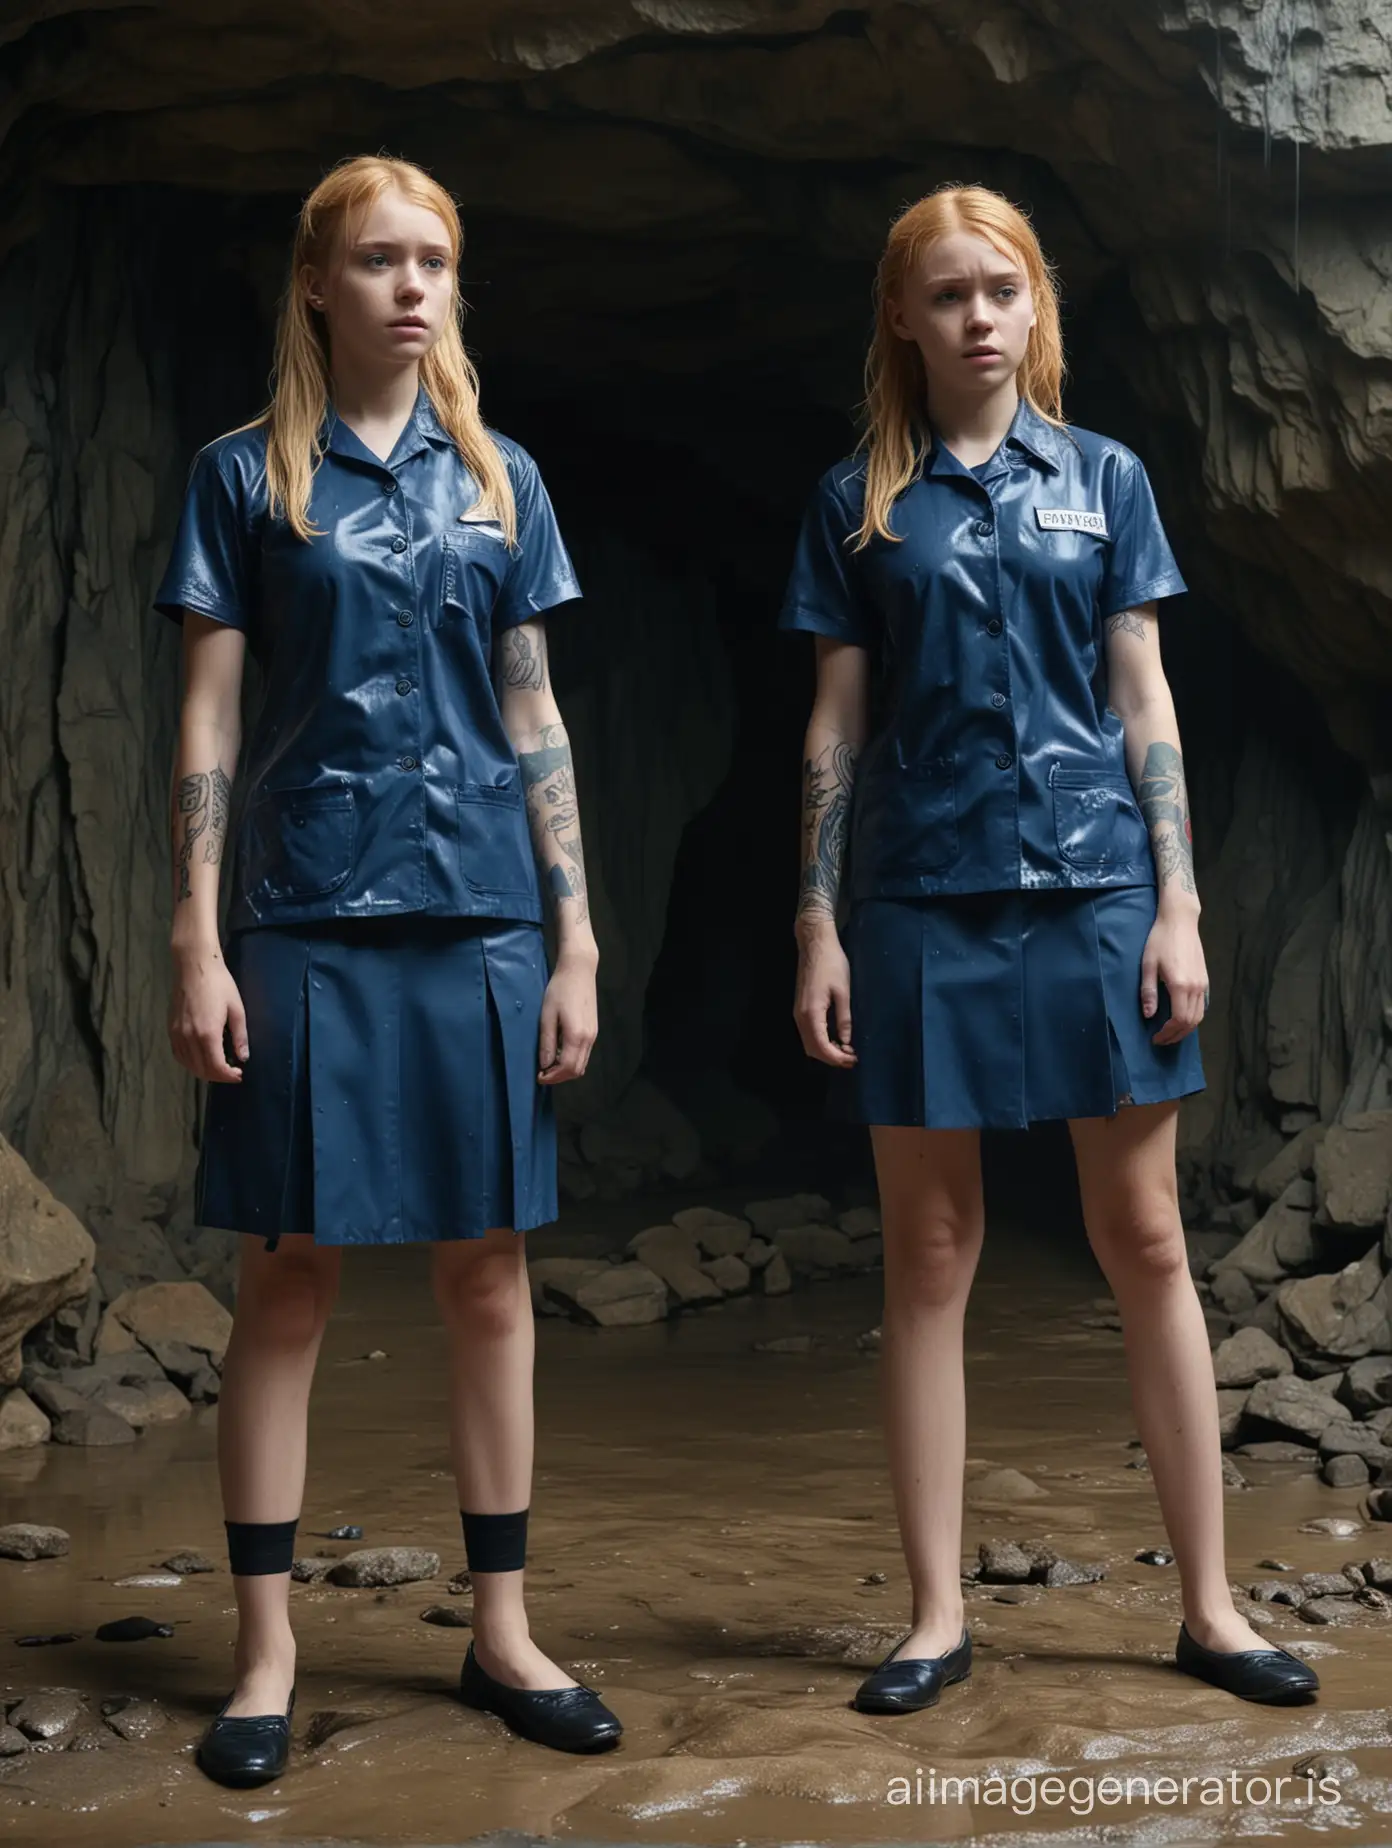 Two young Girls in wet Blue School uniform, bodies are tattooed, one girl 1 is Blonde, other girl 2 is Ginger, stand in pain and suffer before the cave entrance, 4K resolution, studio quality, --chaos 30, --s 300, --weird 1000